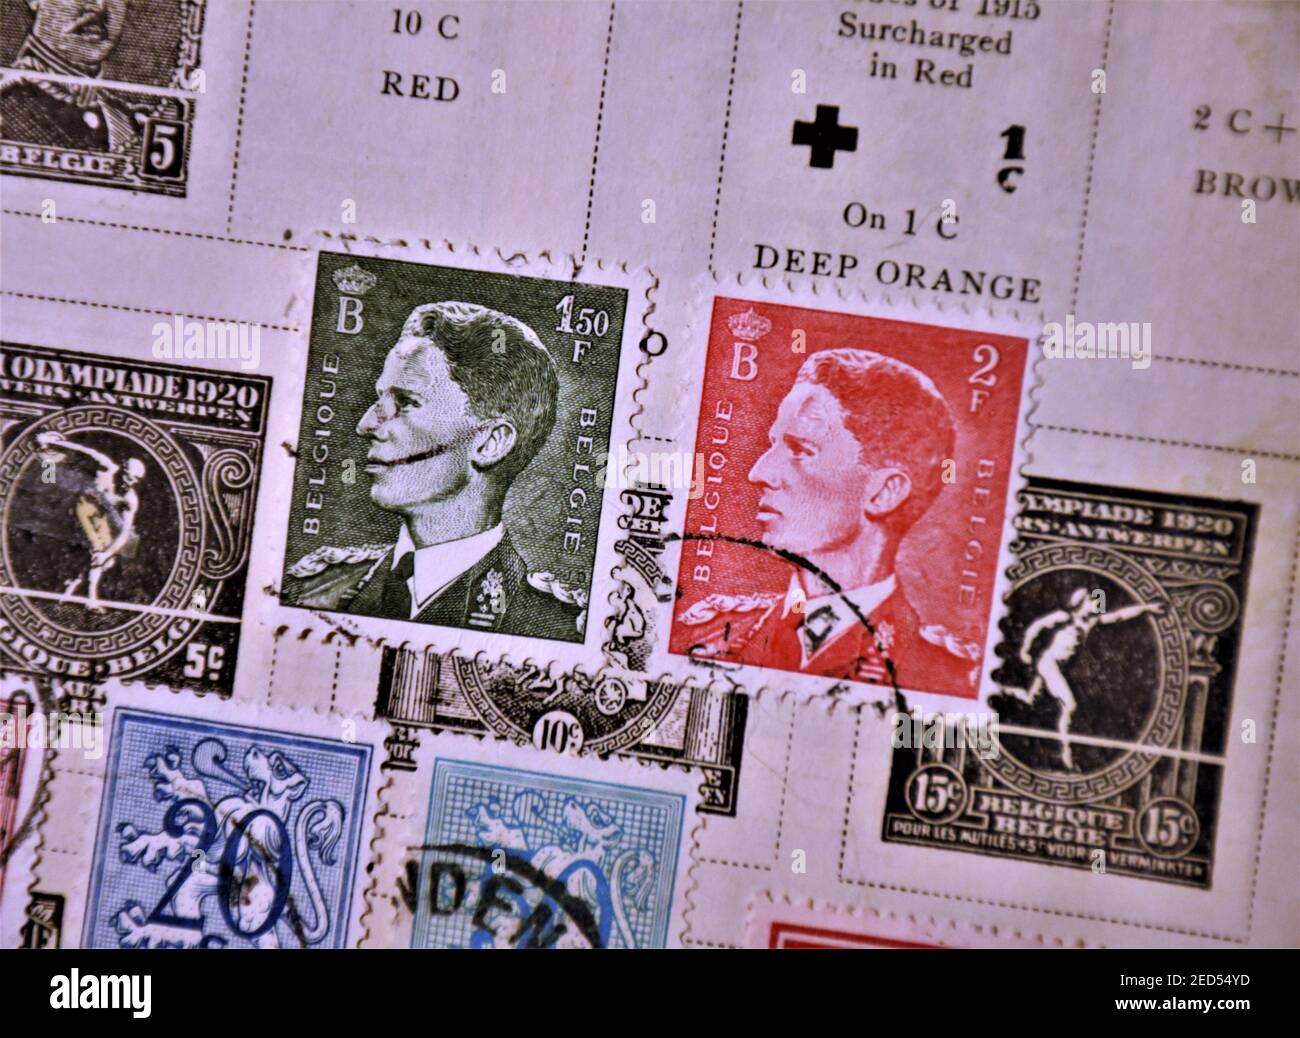 Collectors old world wide postage postal stamps in album, first half of the 20th twentieth century with some dates and cancelations by stmp collectors Stock Photo